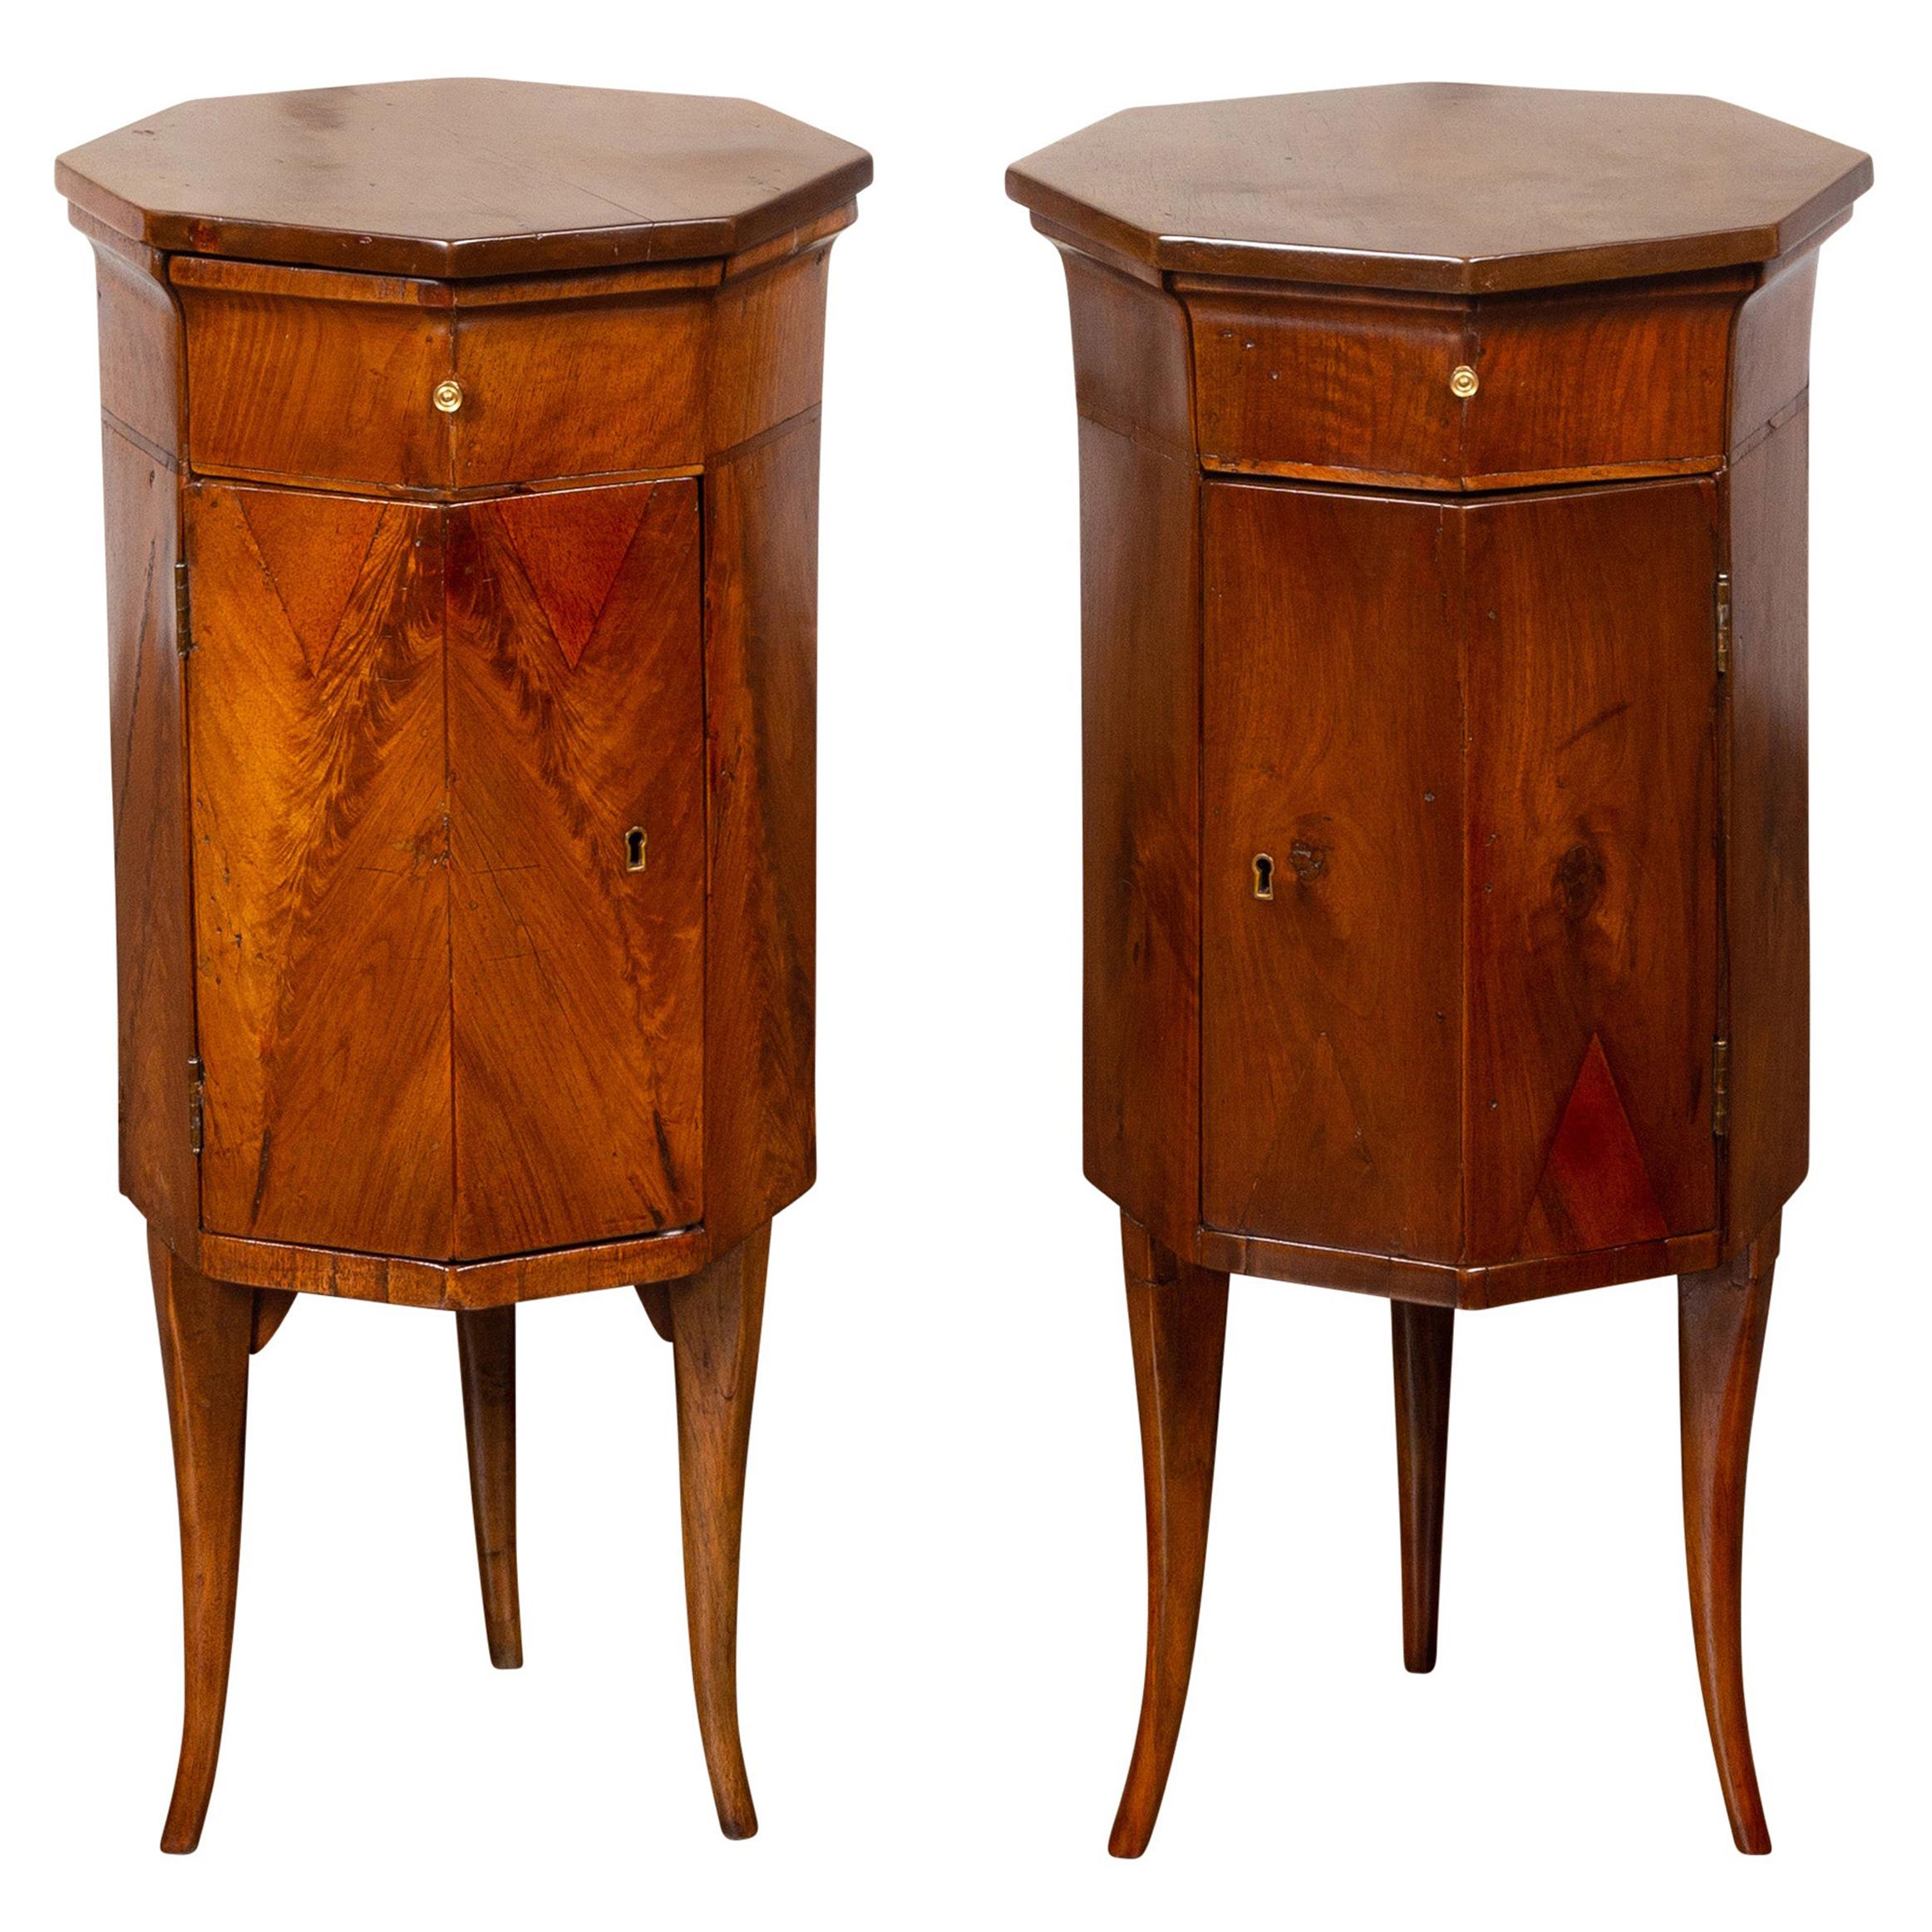 Pair of Italian 1800s Walnut Side Tables with Octogonal Tops, Drawers and Doors